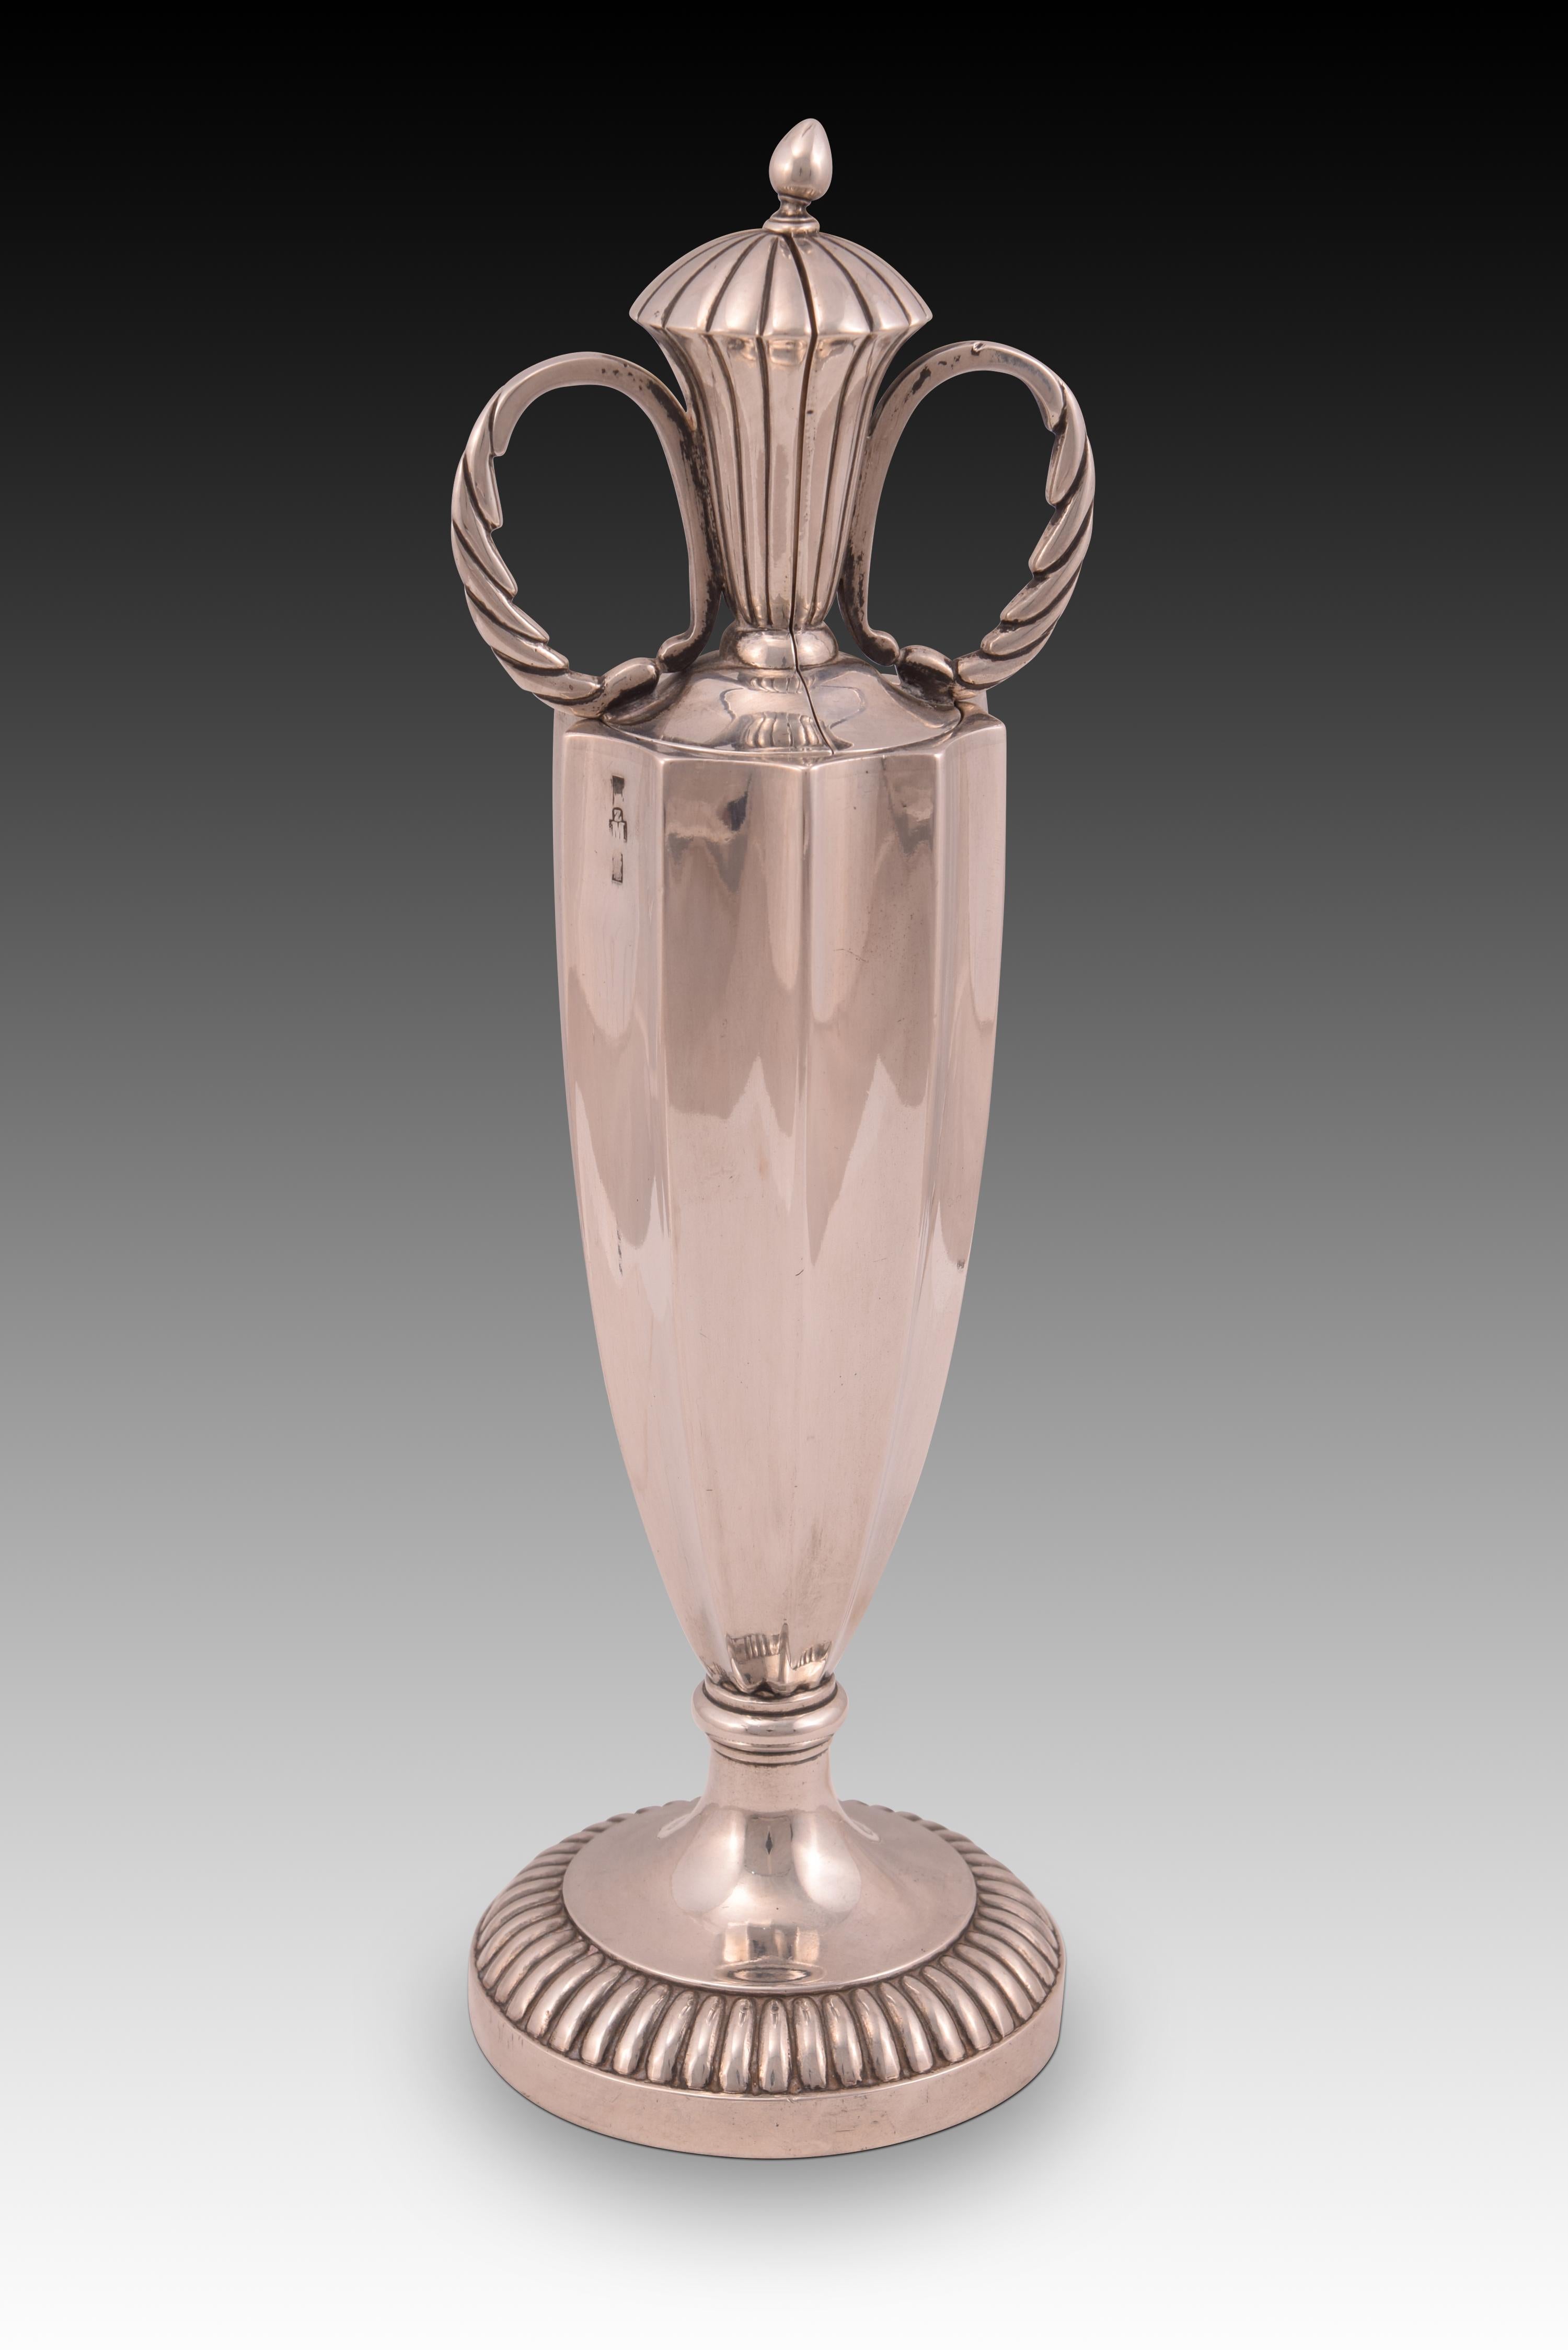 Snuffers with cover. Silver. Real Fábrica de Platería Martínez, Madrid, 1846. 
With contrast markings. 
Scissors to cut the wick of candles, known as snuffers, made of silver in their color that have a decoration with a marked classicist influence